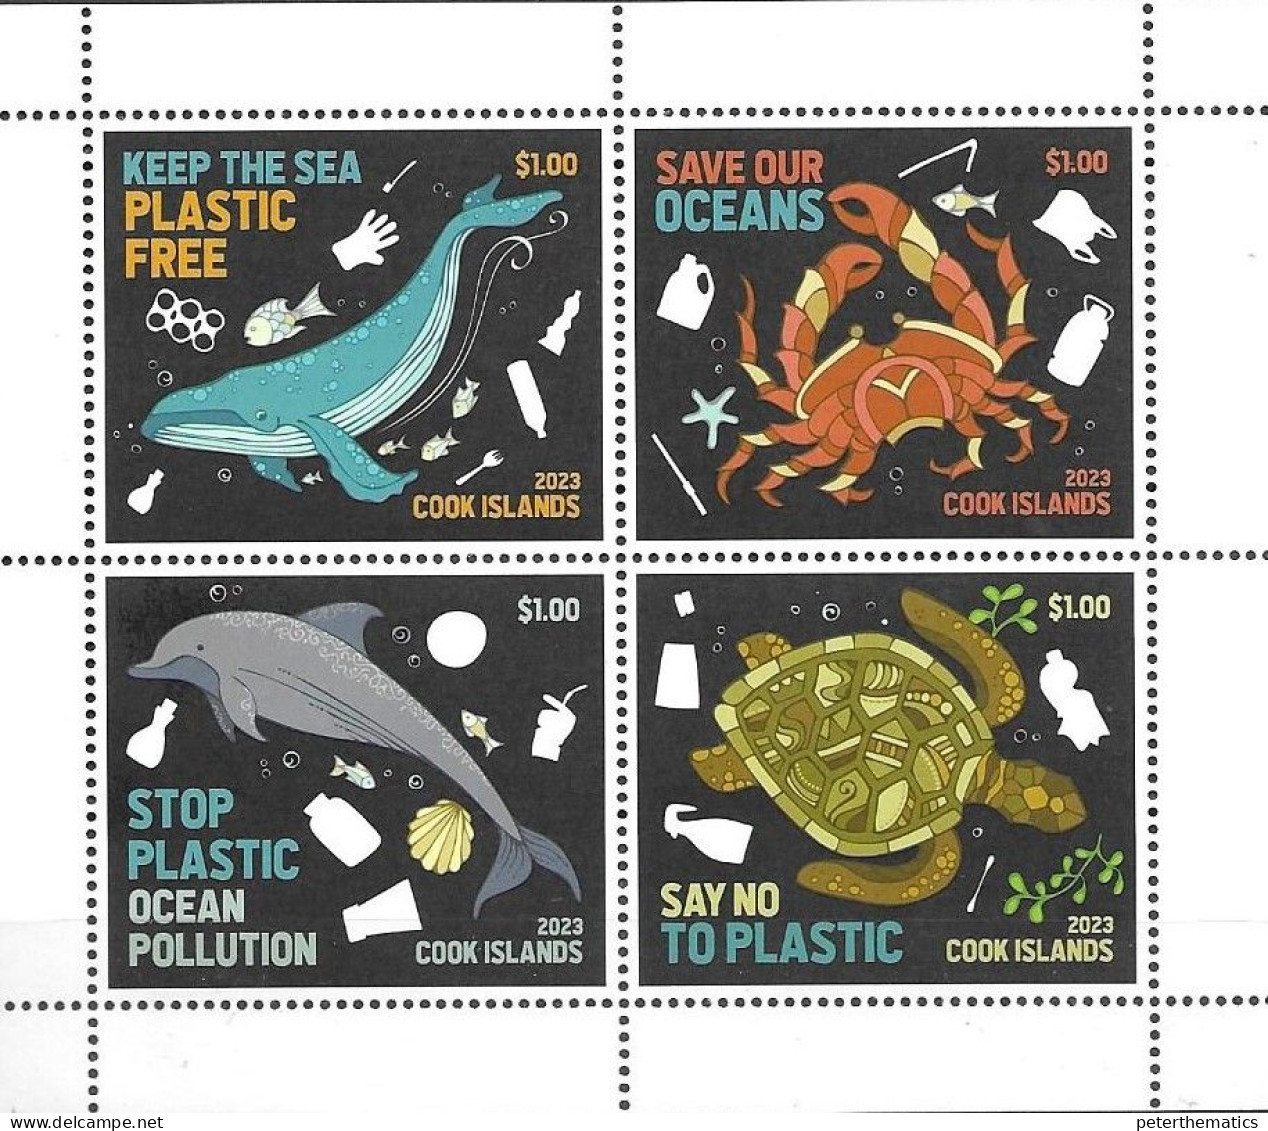 COOK ISLANDS, 2023, MNH, STOP PLASTIC POLLUTION, WHALES, DOLPHINS, TURTLES, CRABS,  SHEETLET OF 4v - Tortues